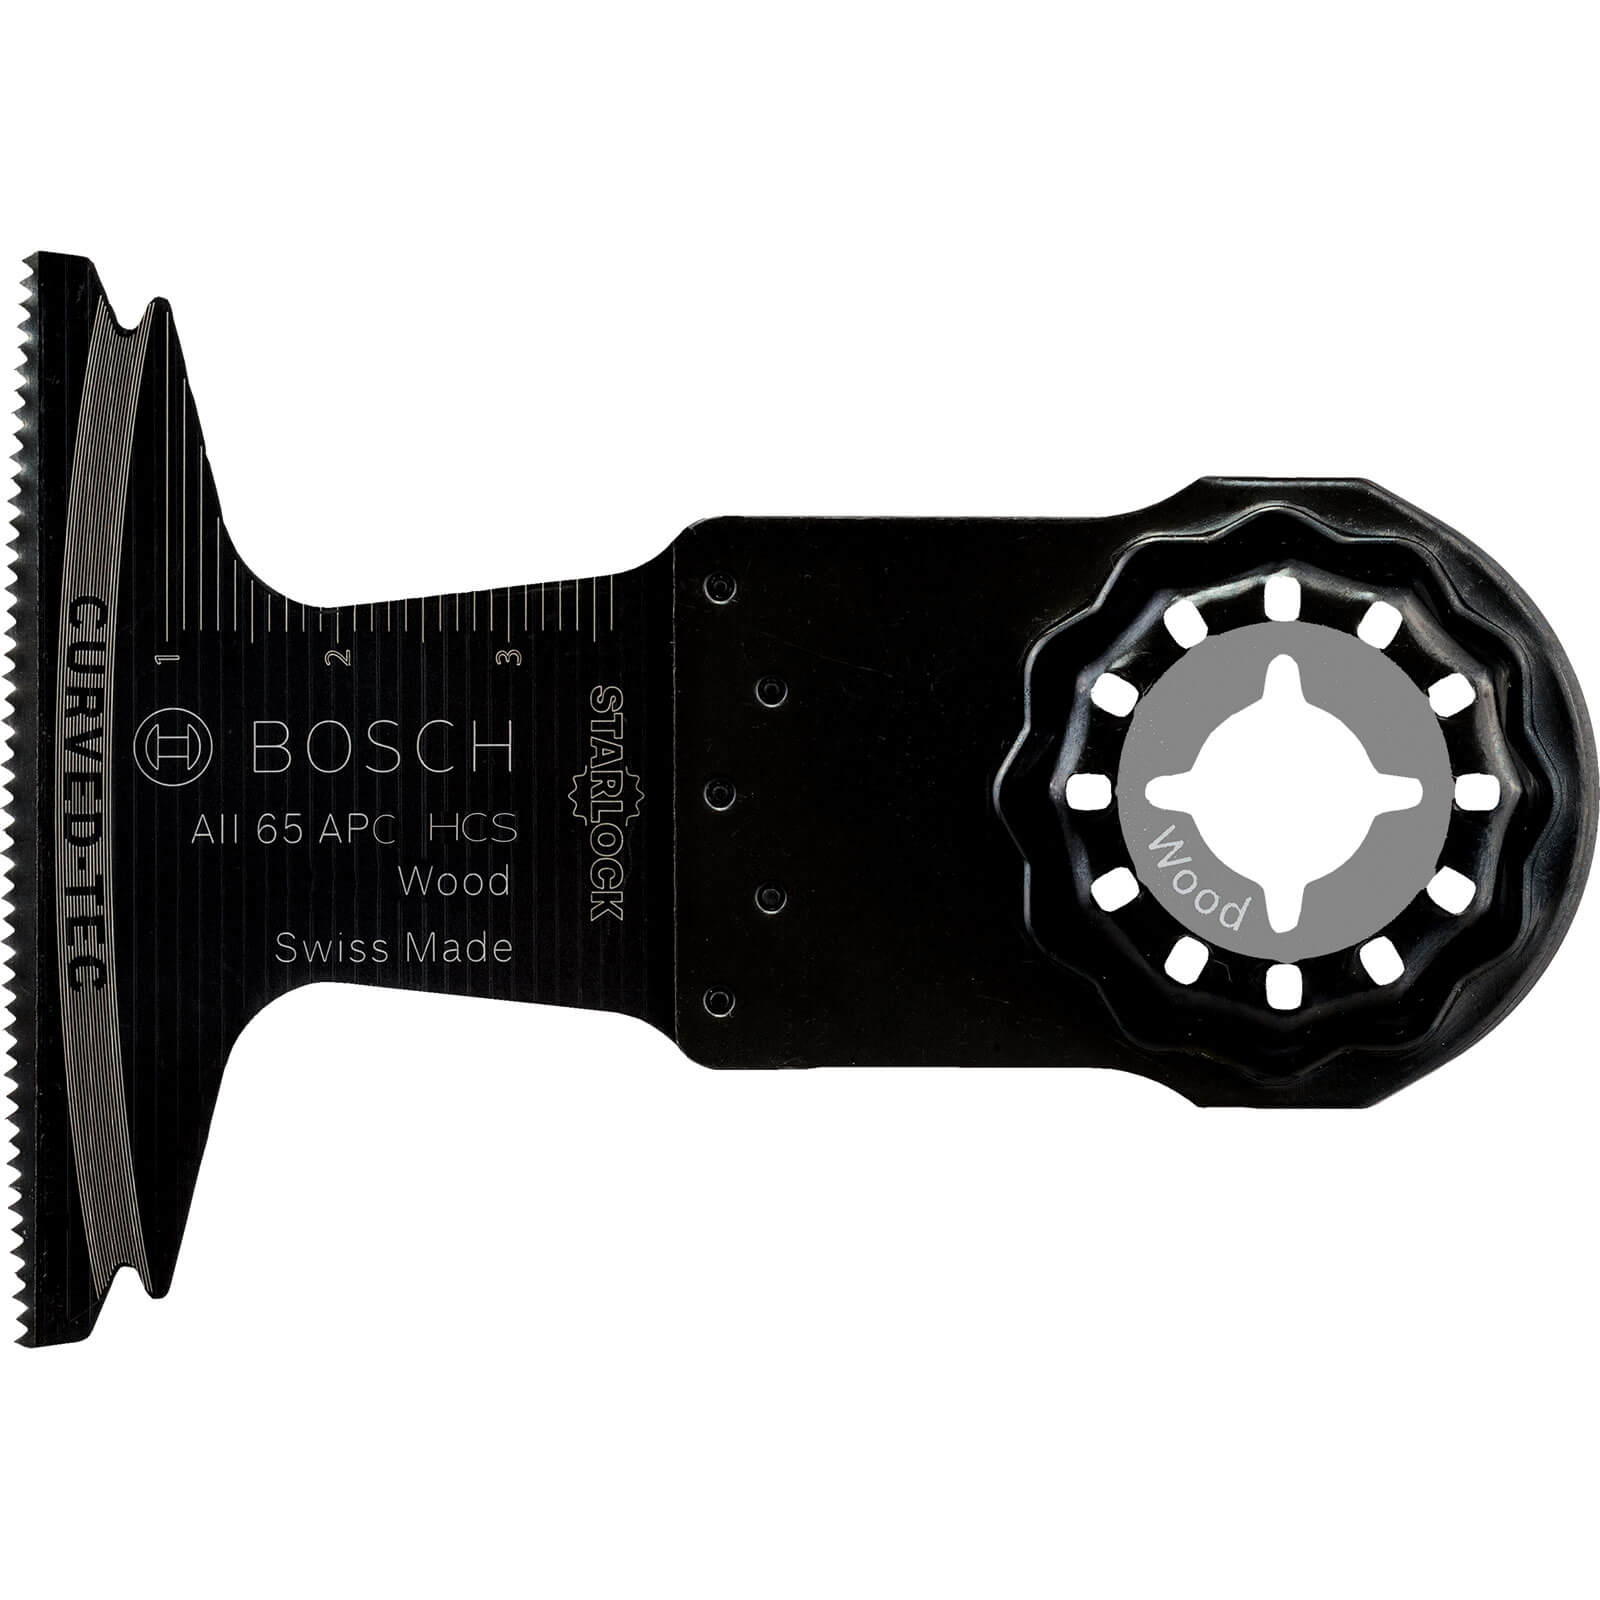 Image of Bosch All 65 APC Wood HCS Starlock Oscillating Multi Tool Plunge Saw Blade 65mm Pack of 1